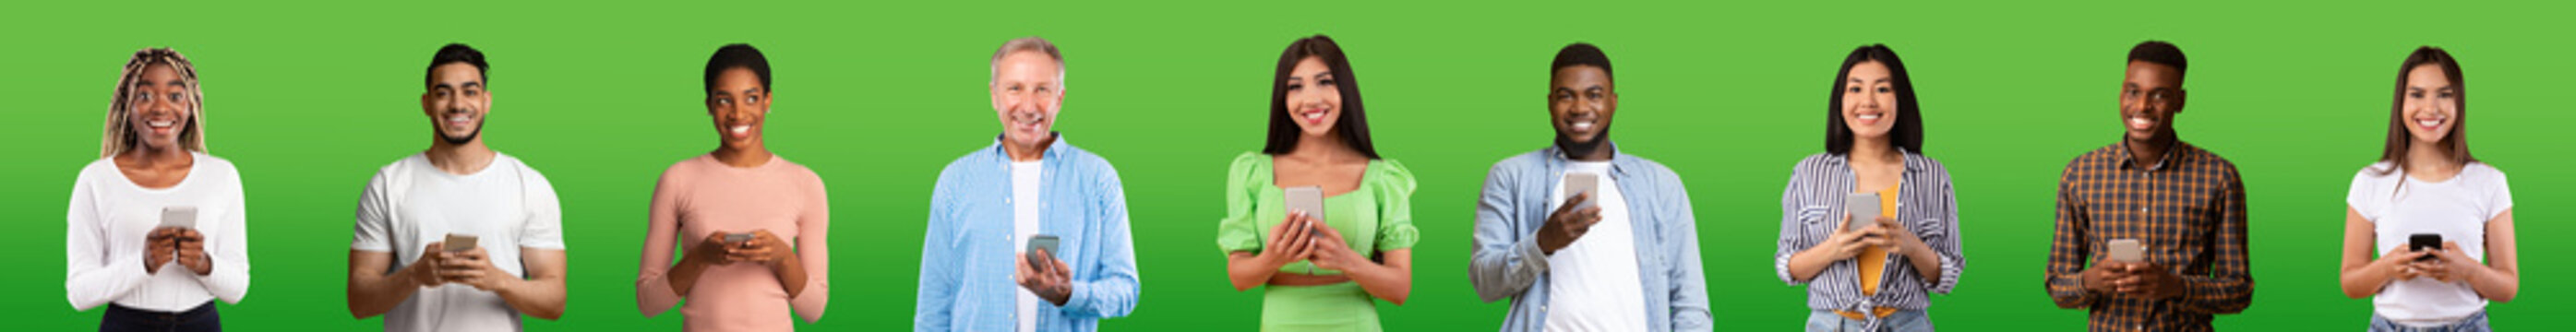 Happy young and old diverse people in casual with phones isolated on green background